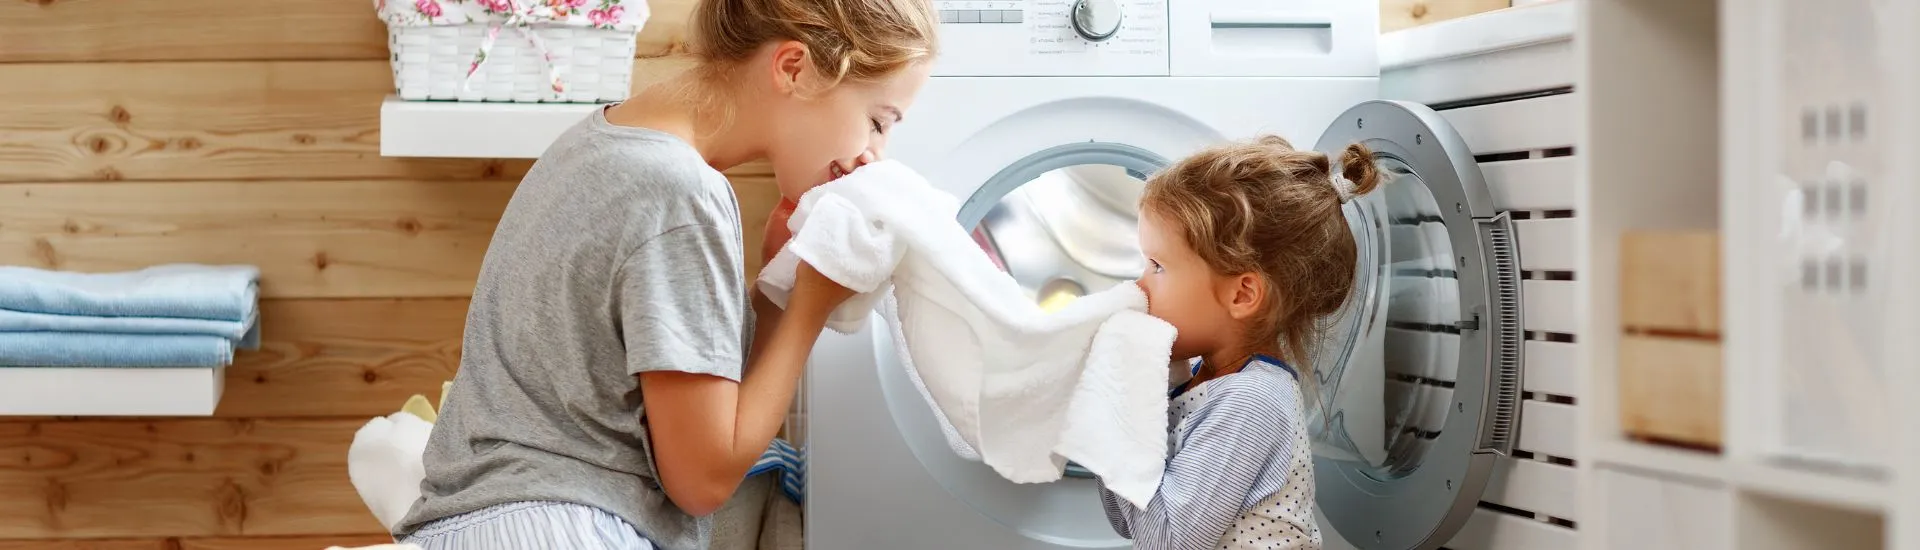 mother and daughter unloading washing machine